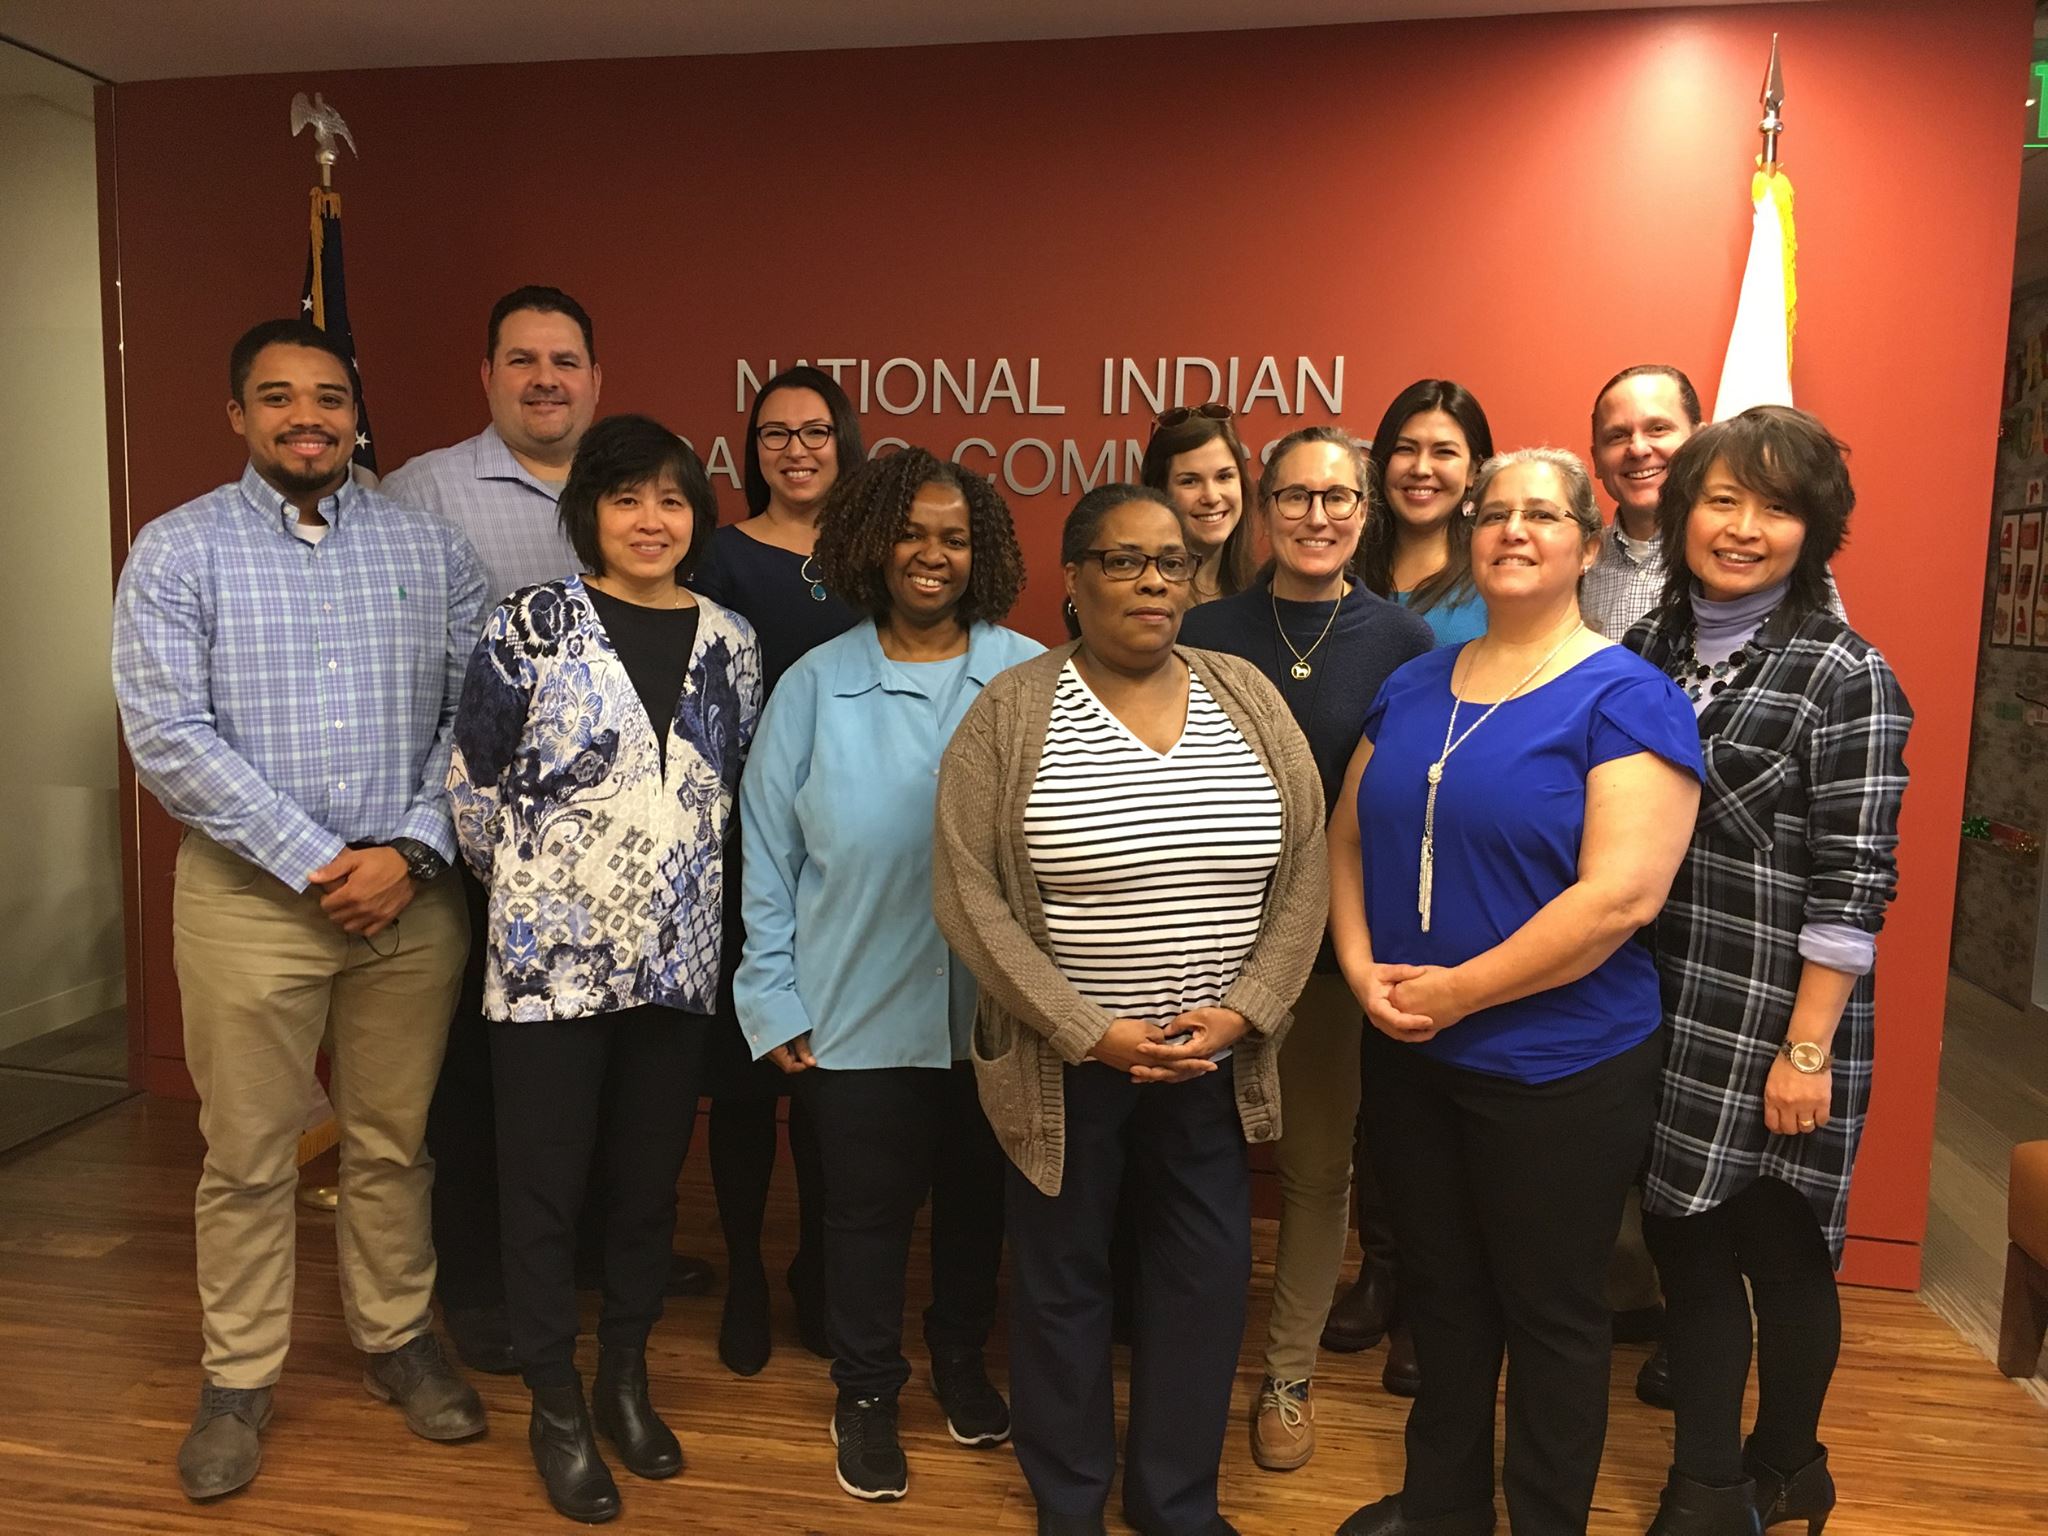 Employees love working at the National Indian Gaming Commission